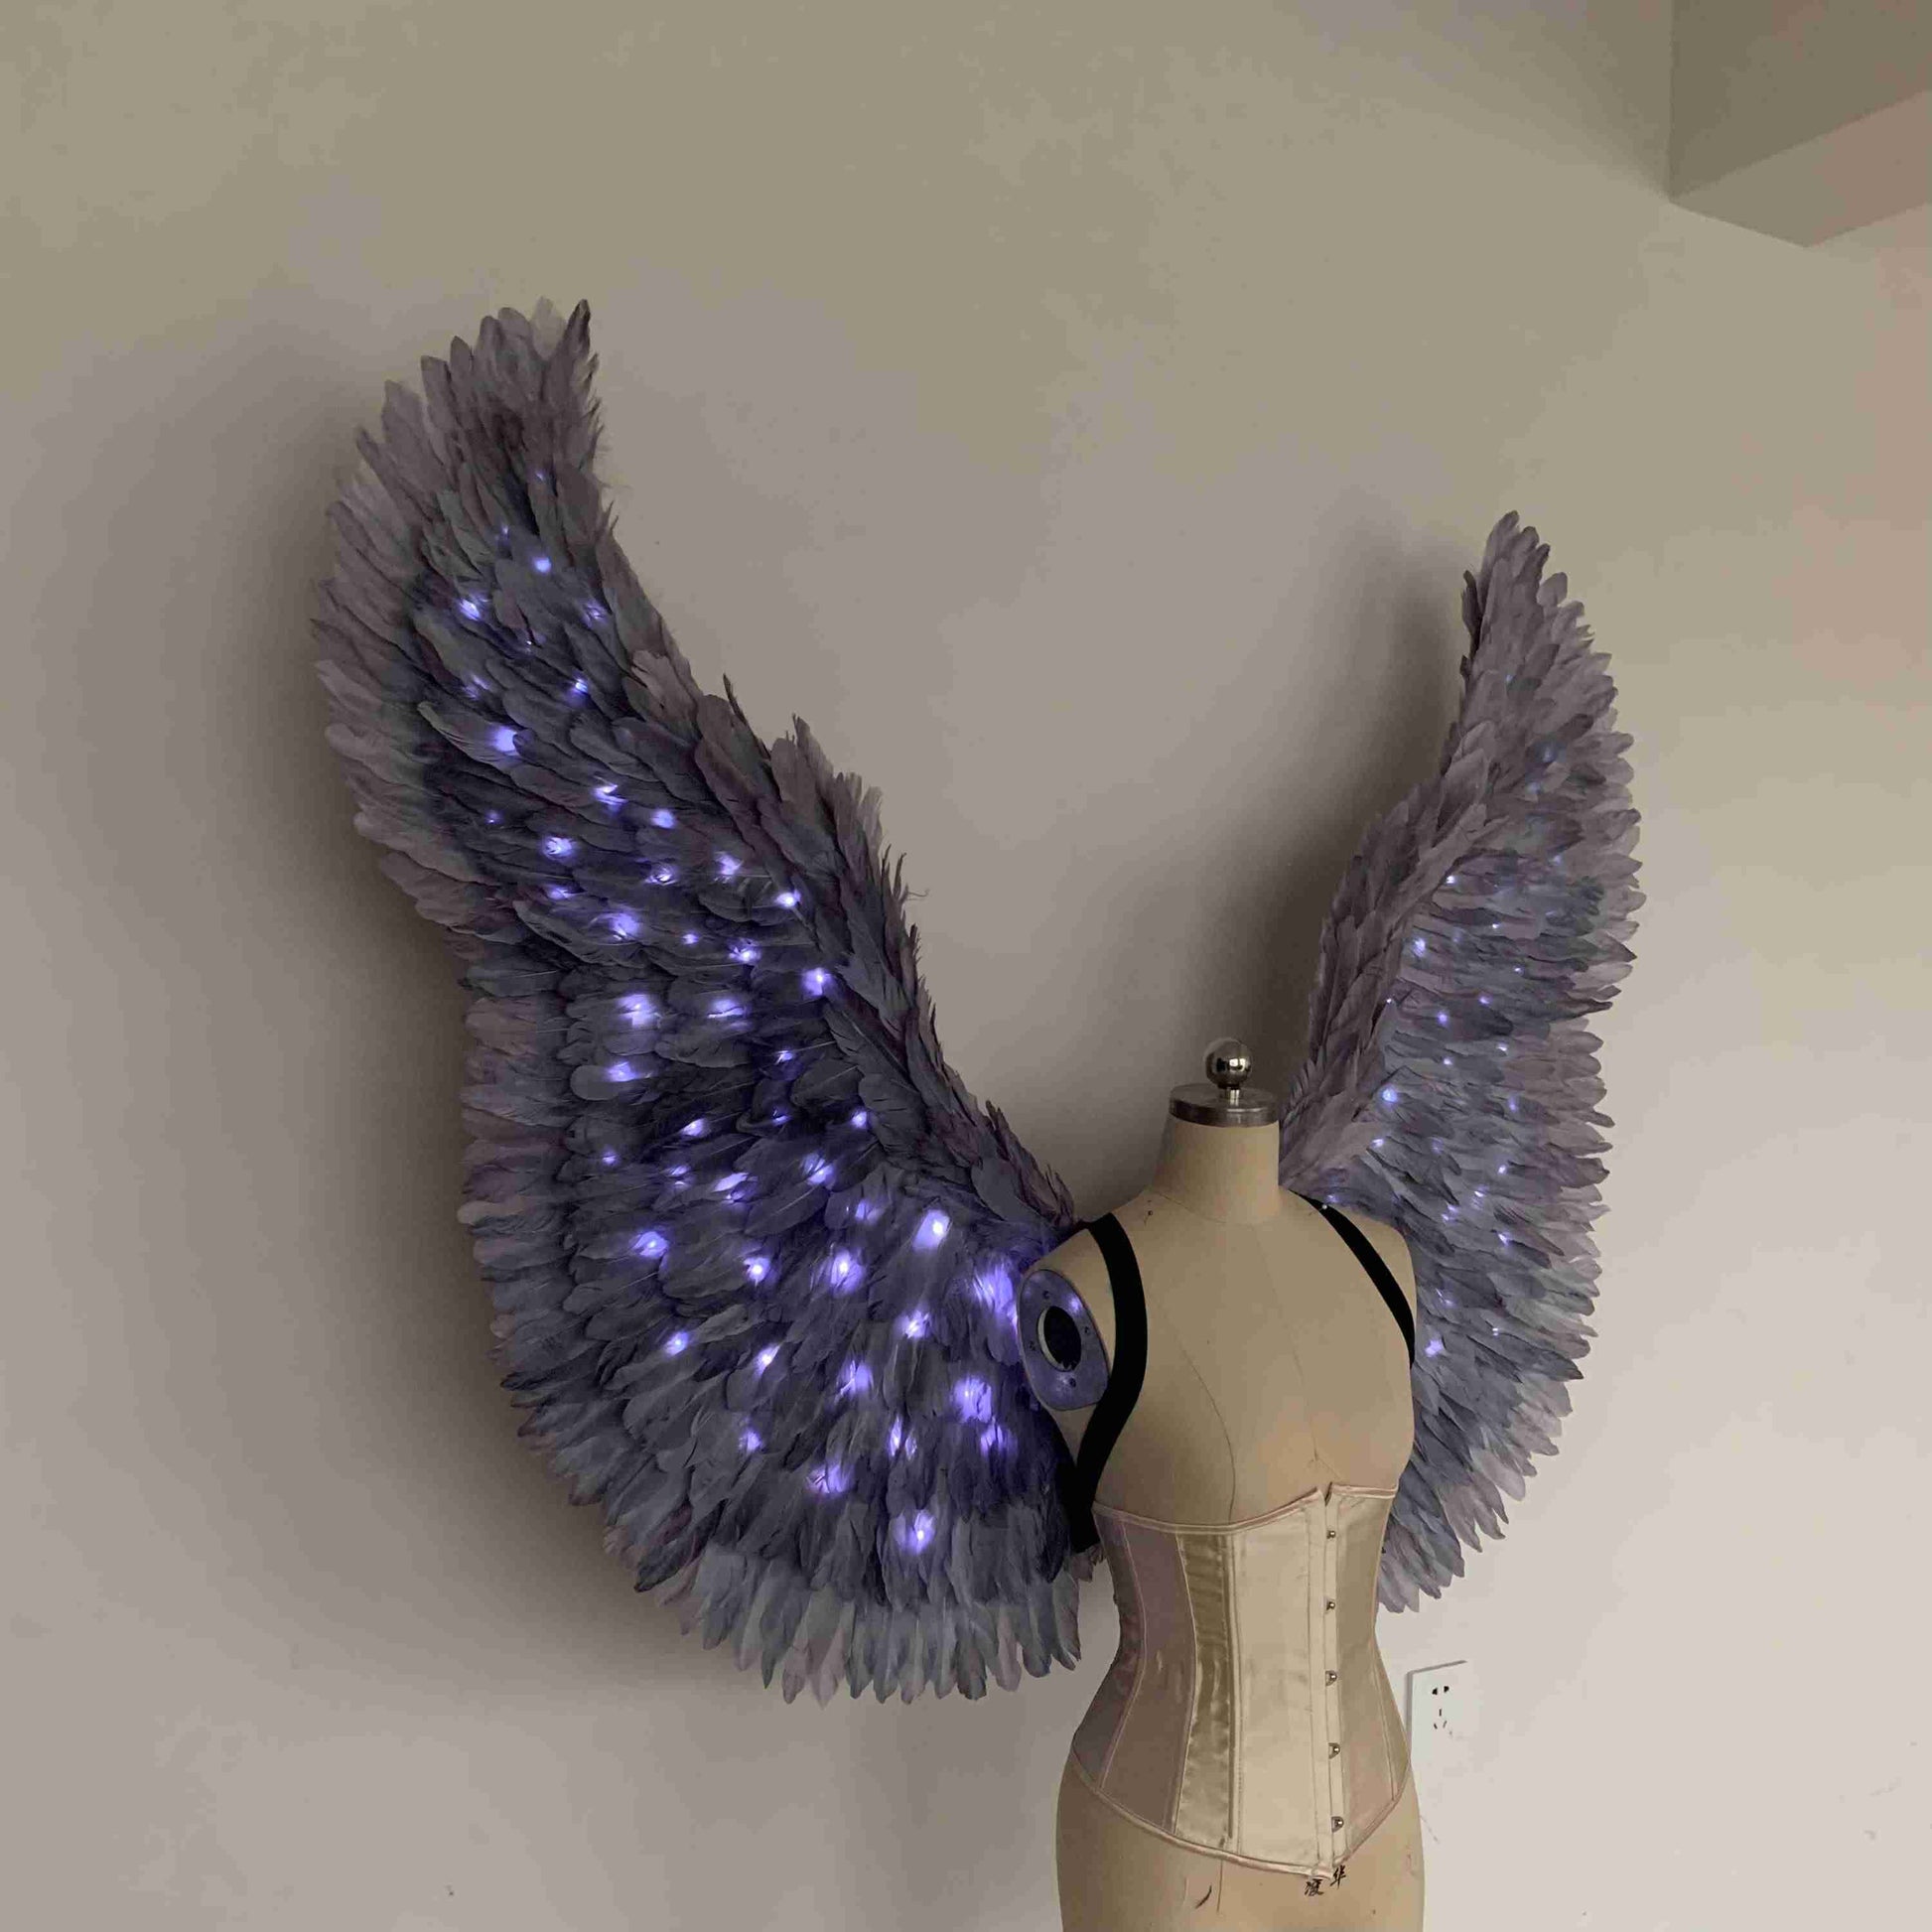 Our purple color angel wings from the right side. Made from goose feathers with LED lights inside. Wings for angel costume. Suitable for photoshoots.